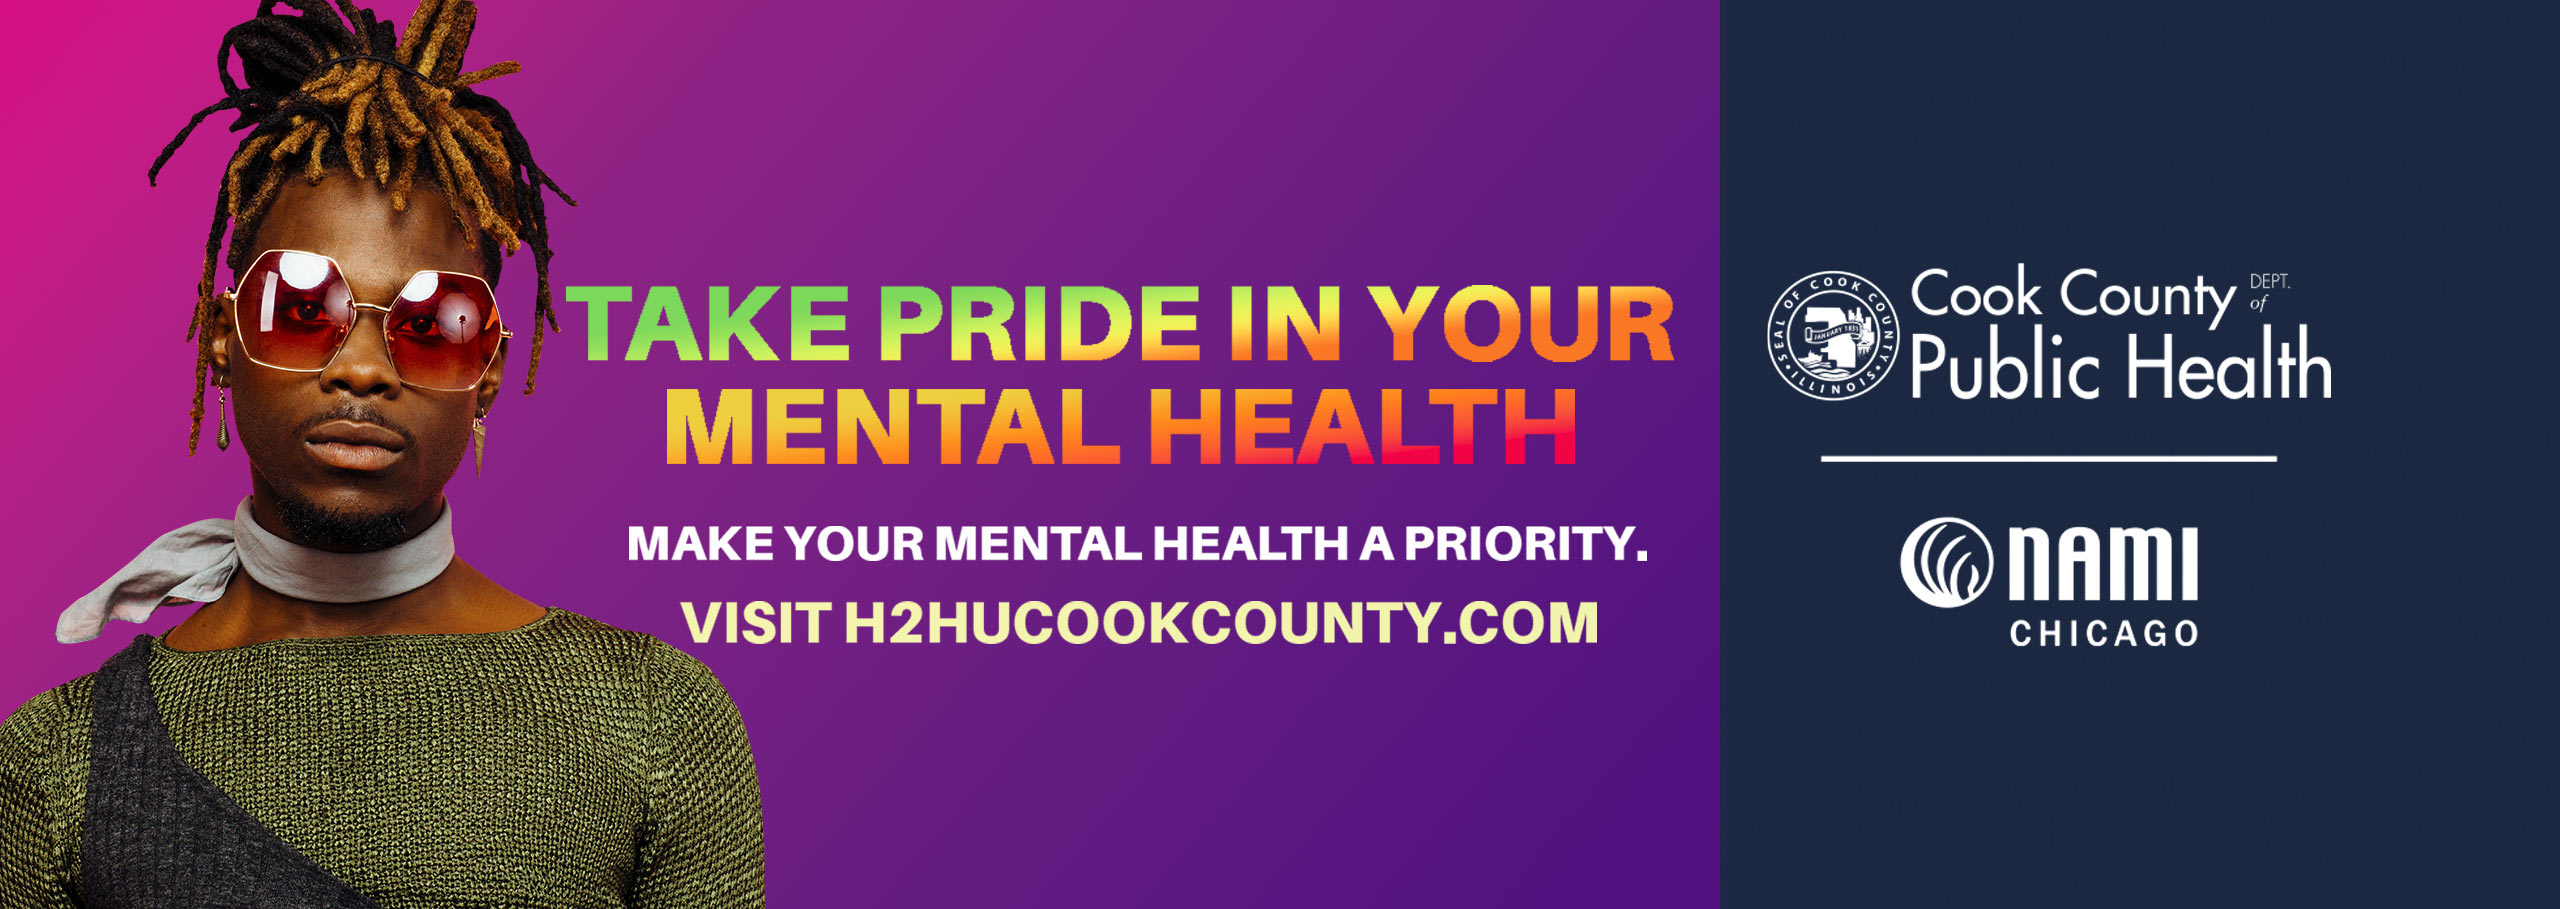 Take Pride in Your Mental Health